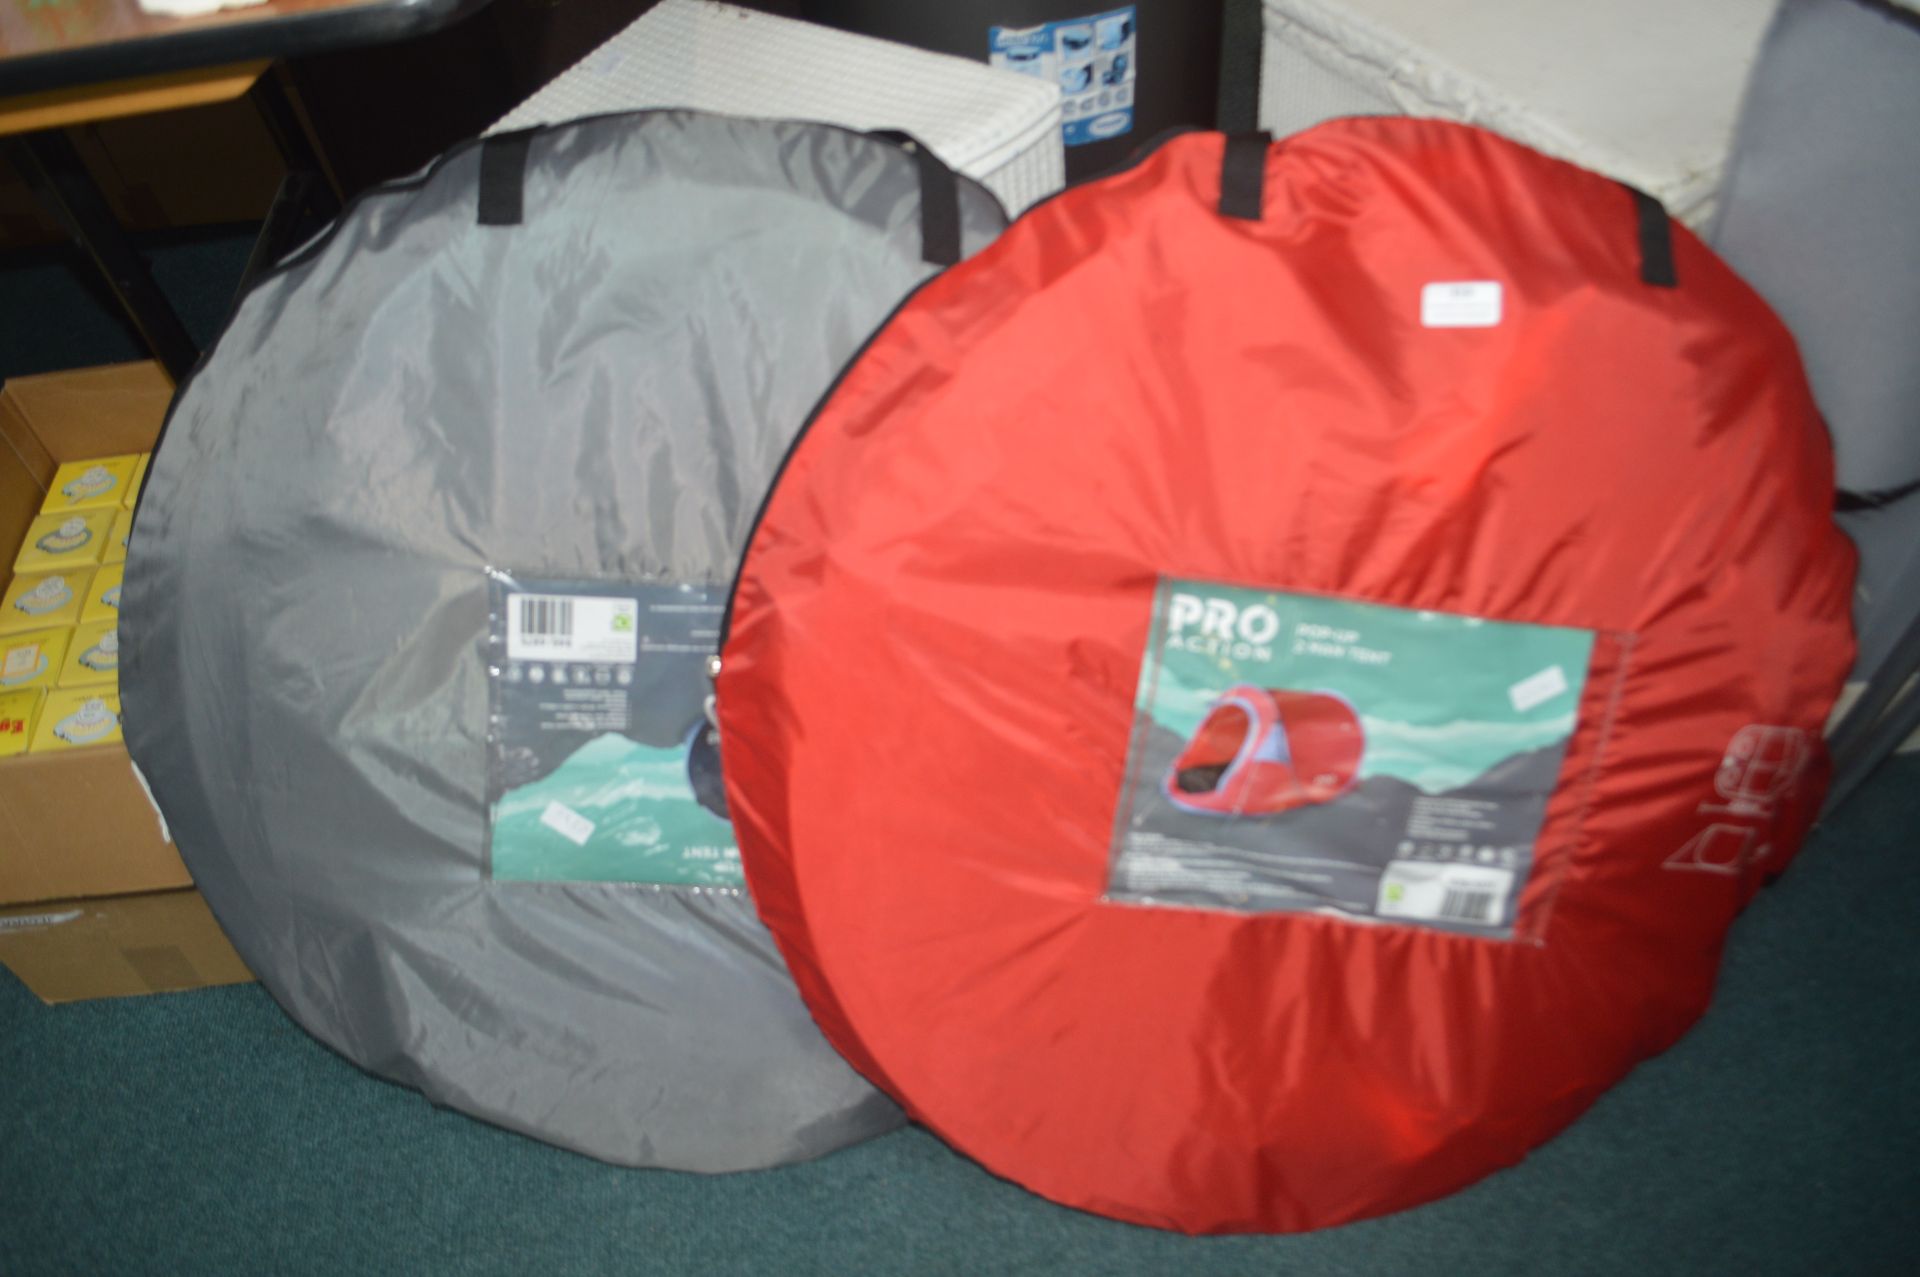 Two Pro Action Pop-Up Tents